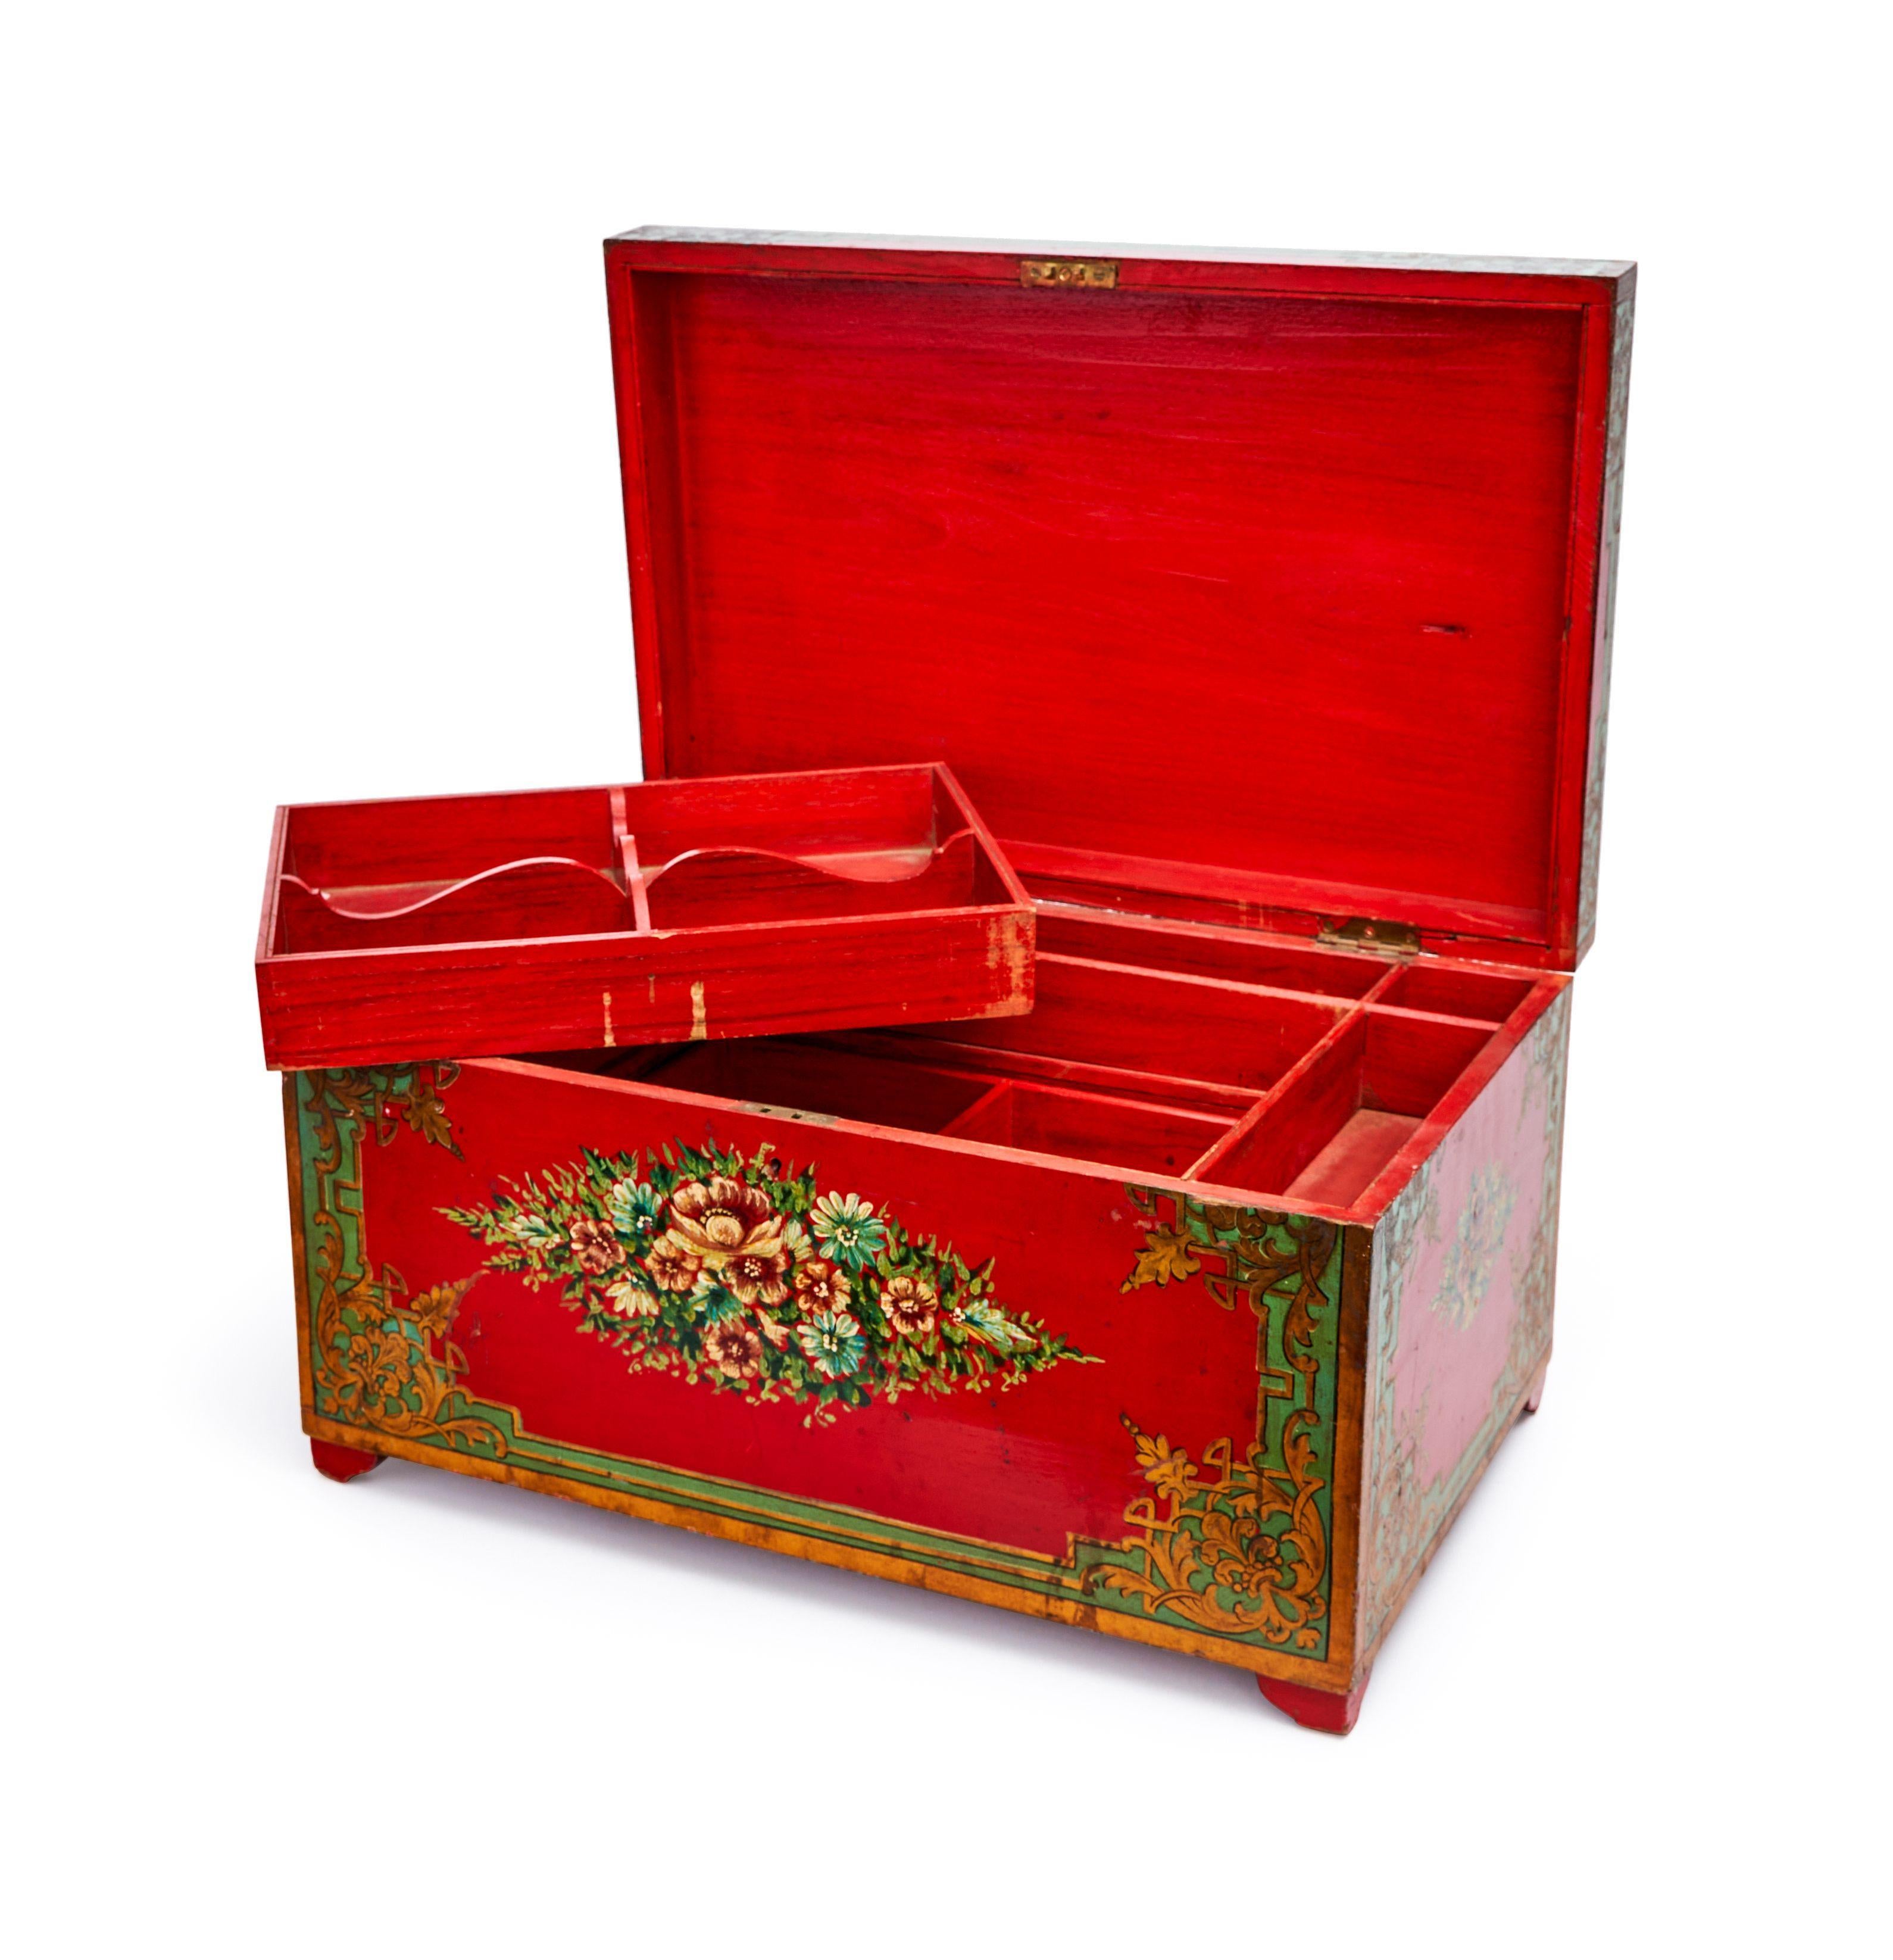 A stunning cashier box from the Qajar era, adorned with a lovely red lacquer finish, and floral designs all around the box.
